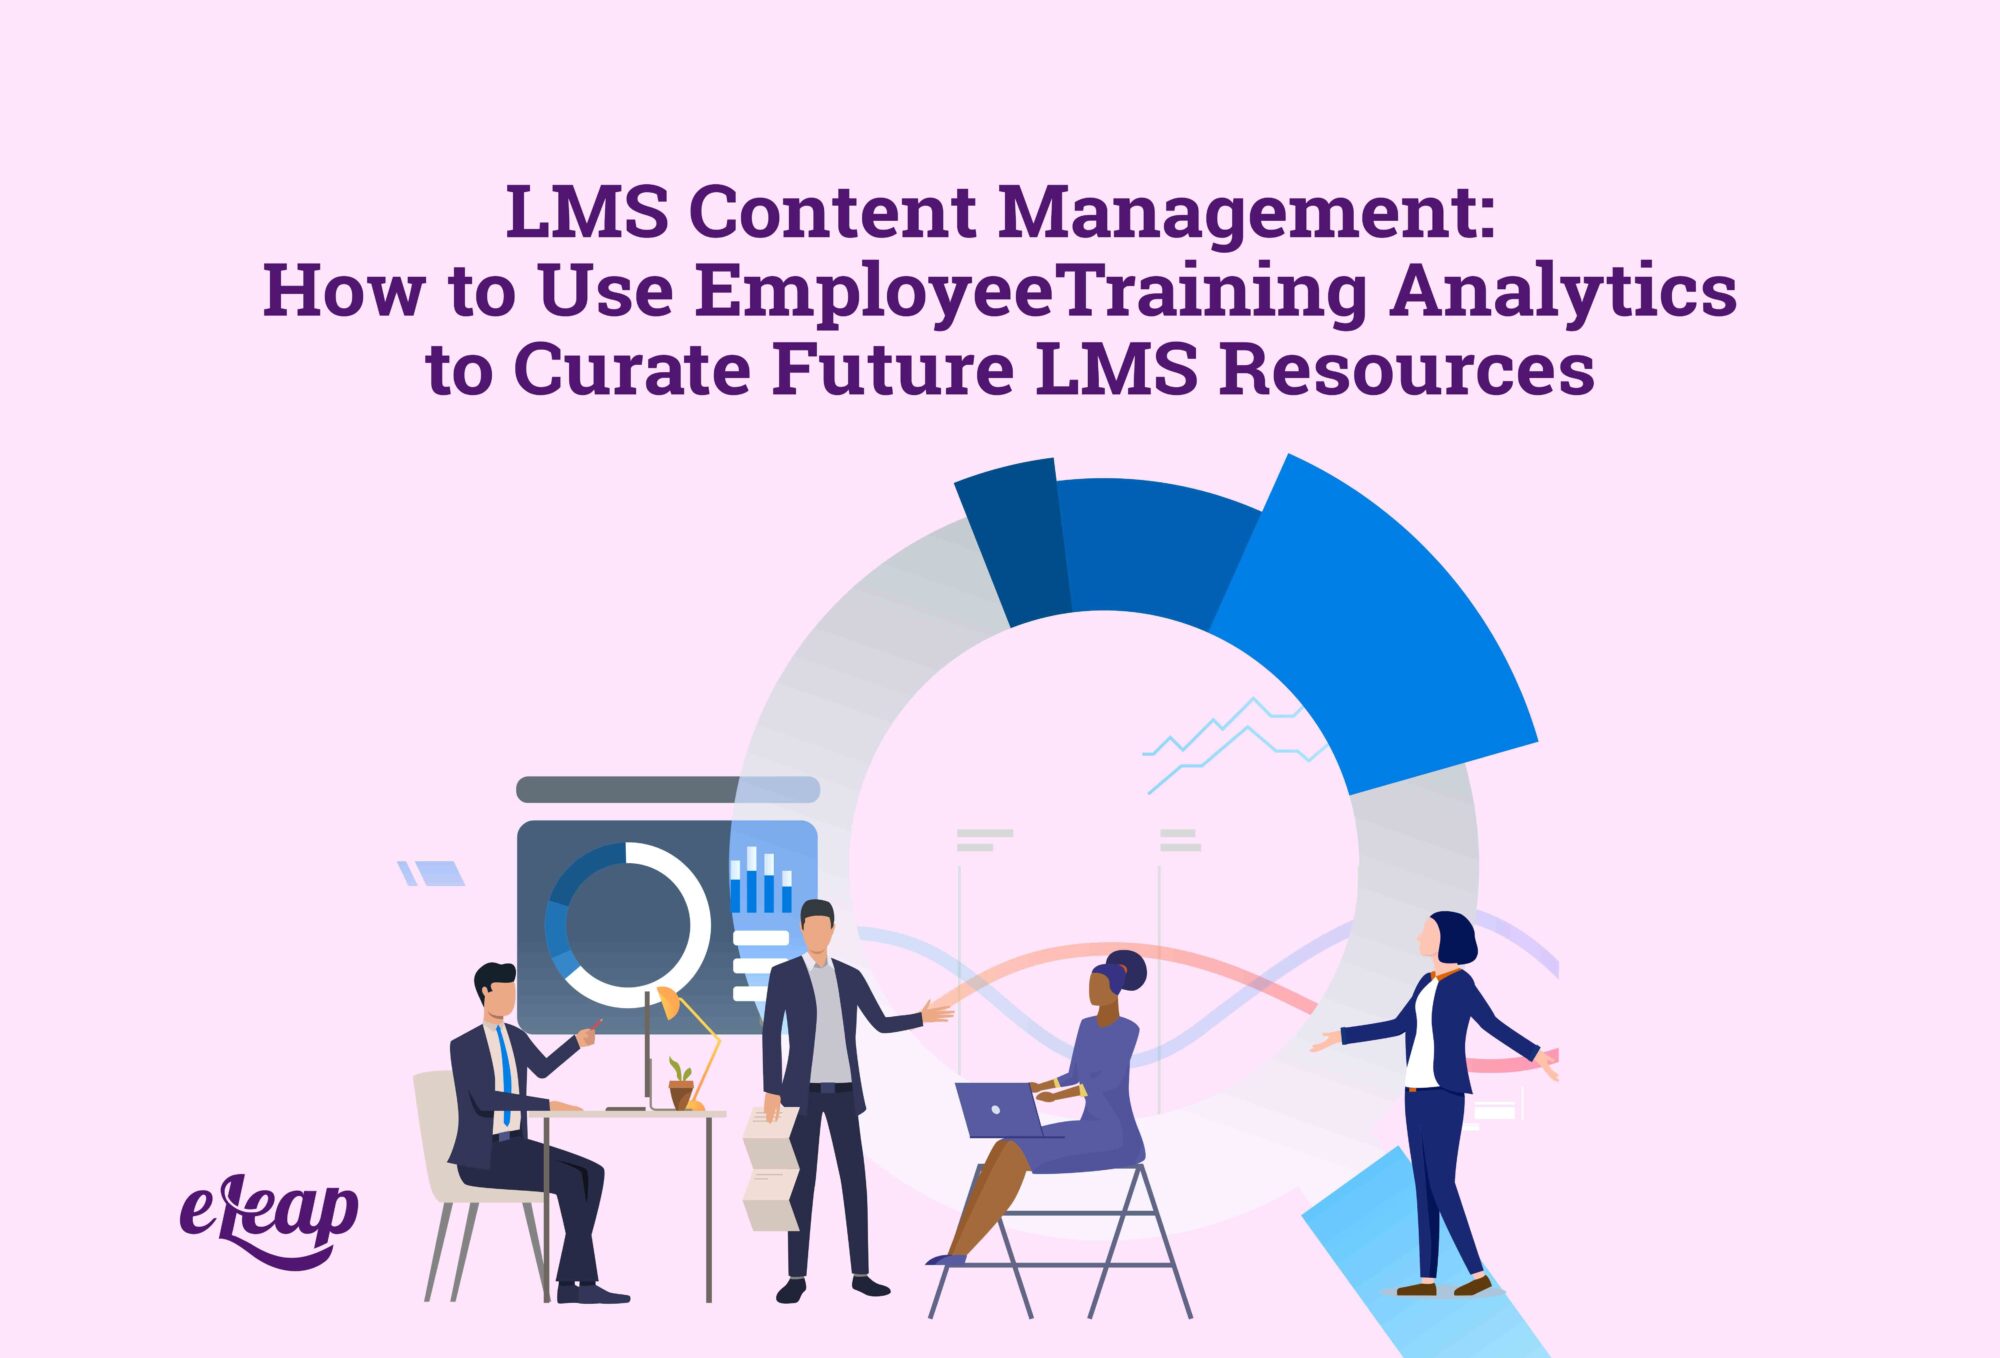 LMS Content Management: How to Use Employee Training Analytics to Curate Future LMS Resources